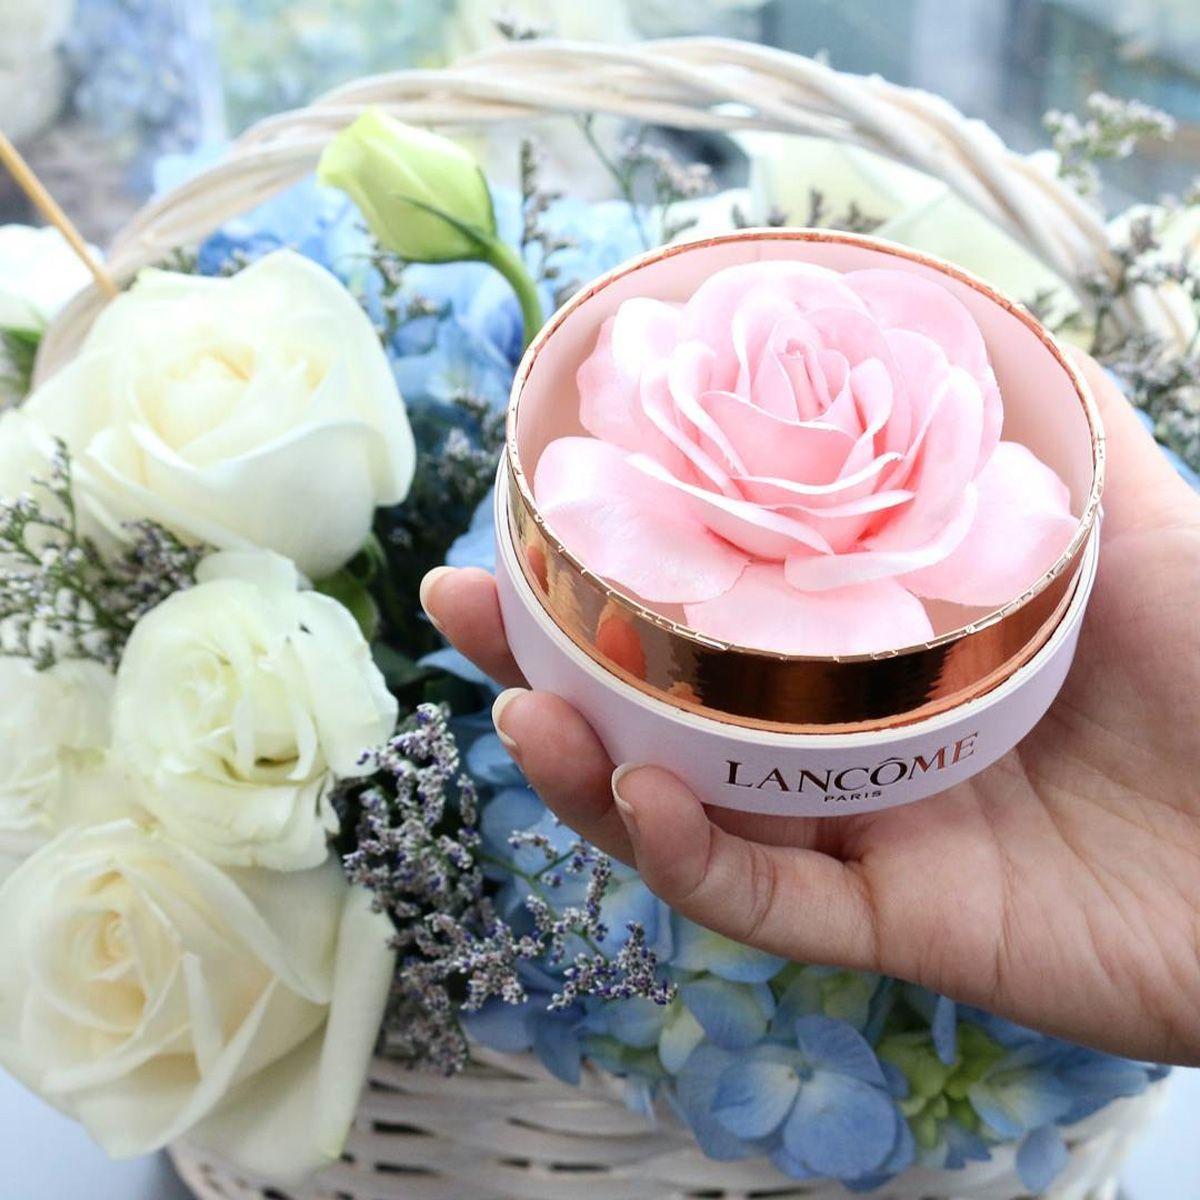 Lancome Flower Logo - Lancôme Launches New Rose Shaped Highlighter And It's Amazing